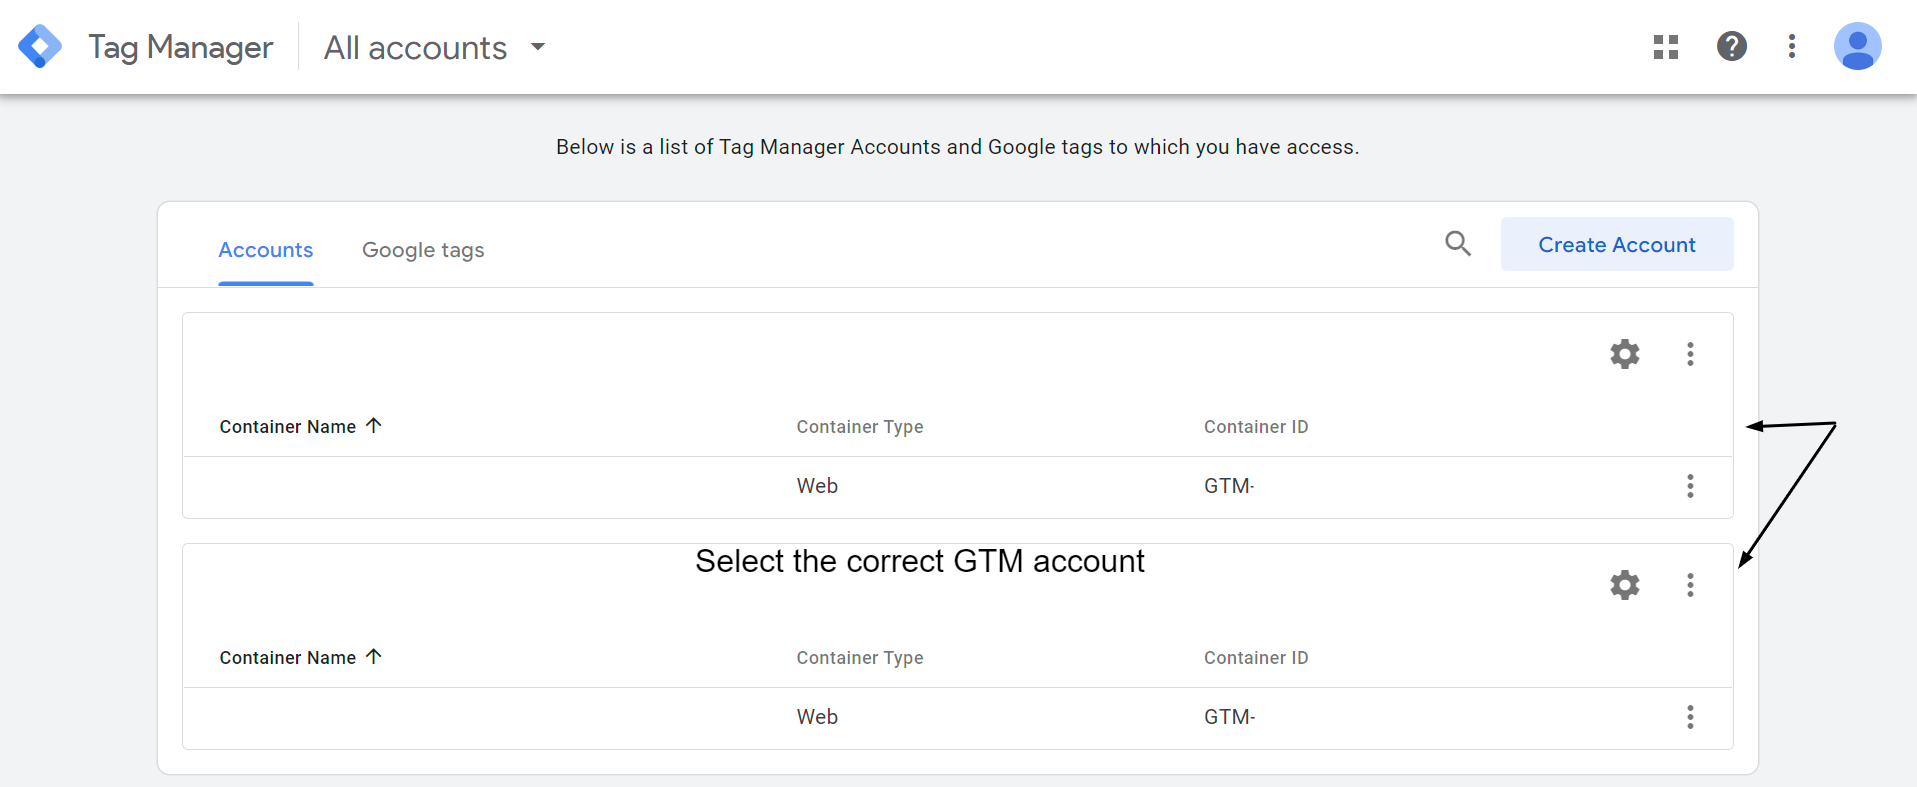 Select the correct GTM account